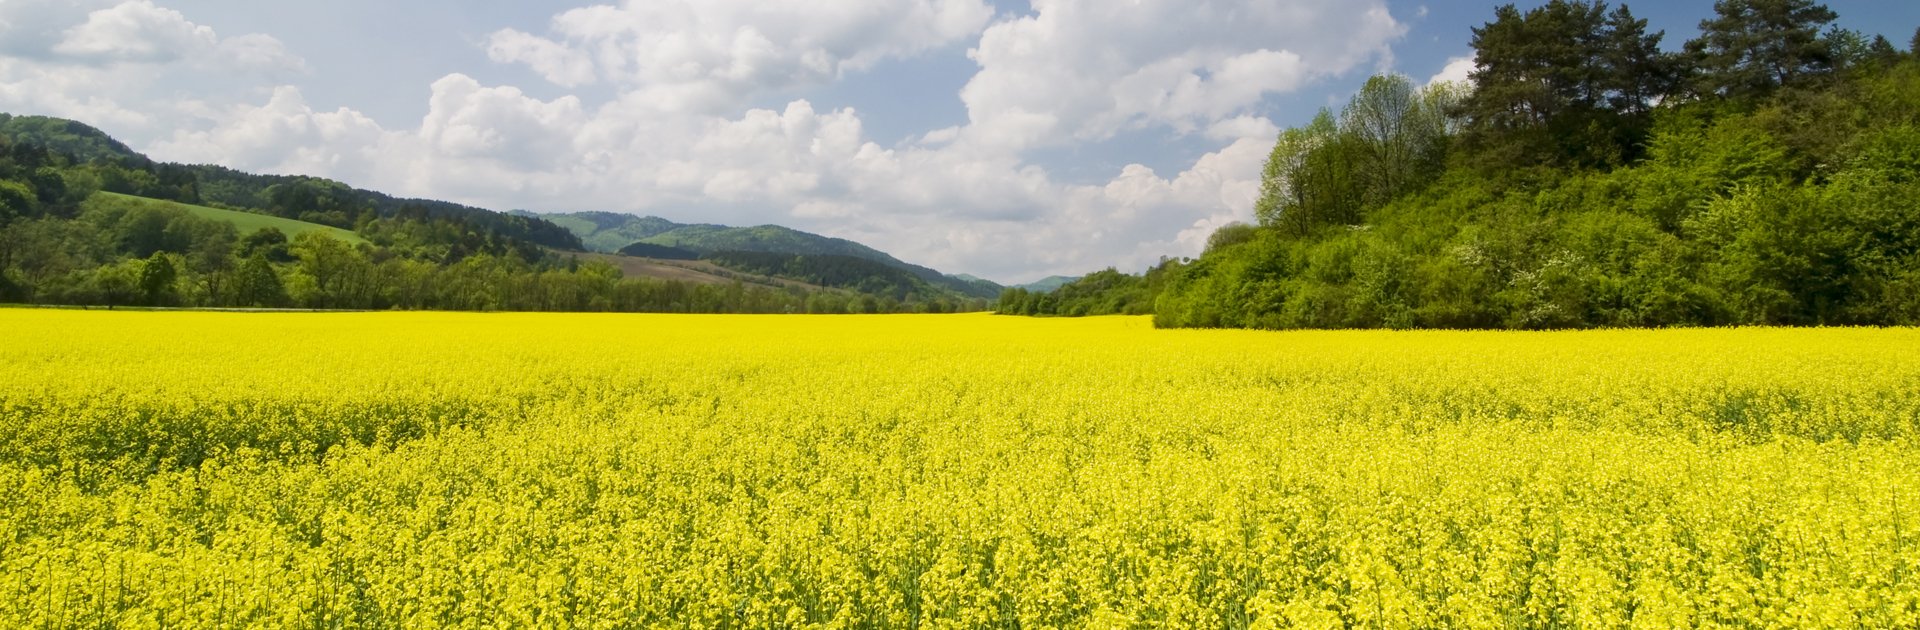 A hilly landscape begins behind a blooming rapeseed field. The sky is slightly cloudy